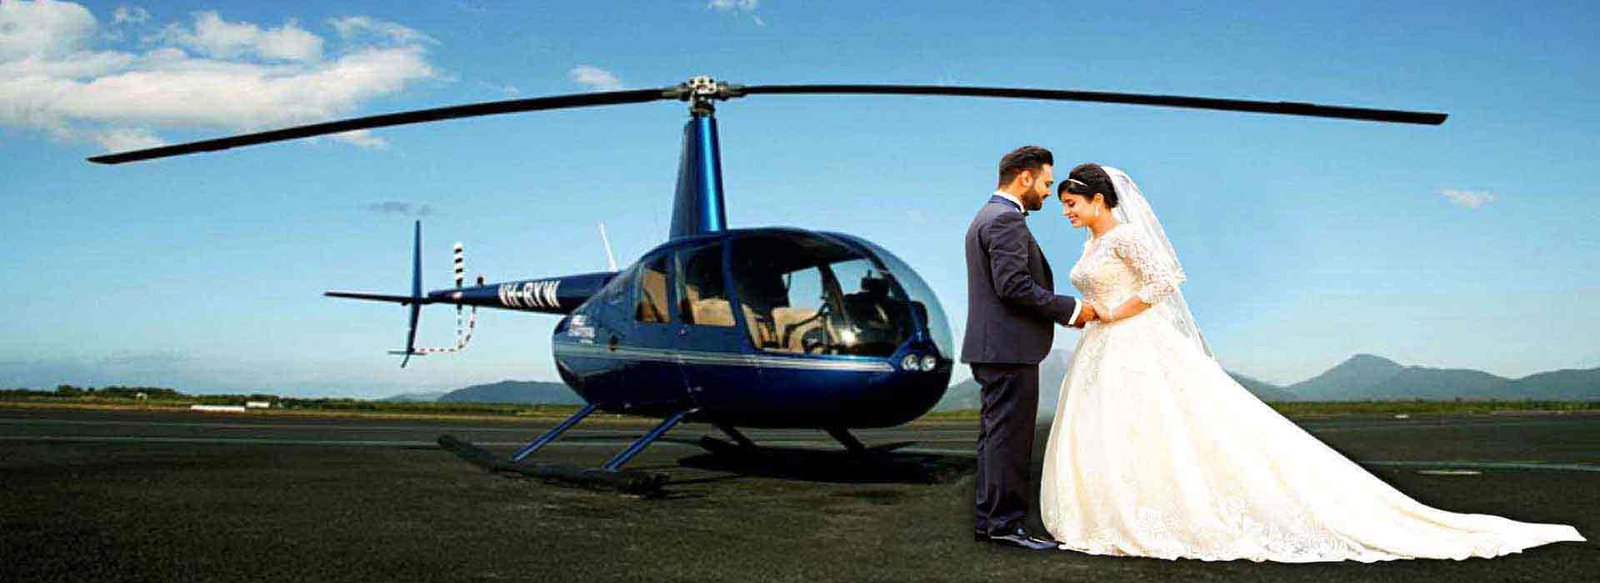 Helicopter Rental Service For Marriage in Delhi NCR